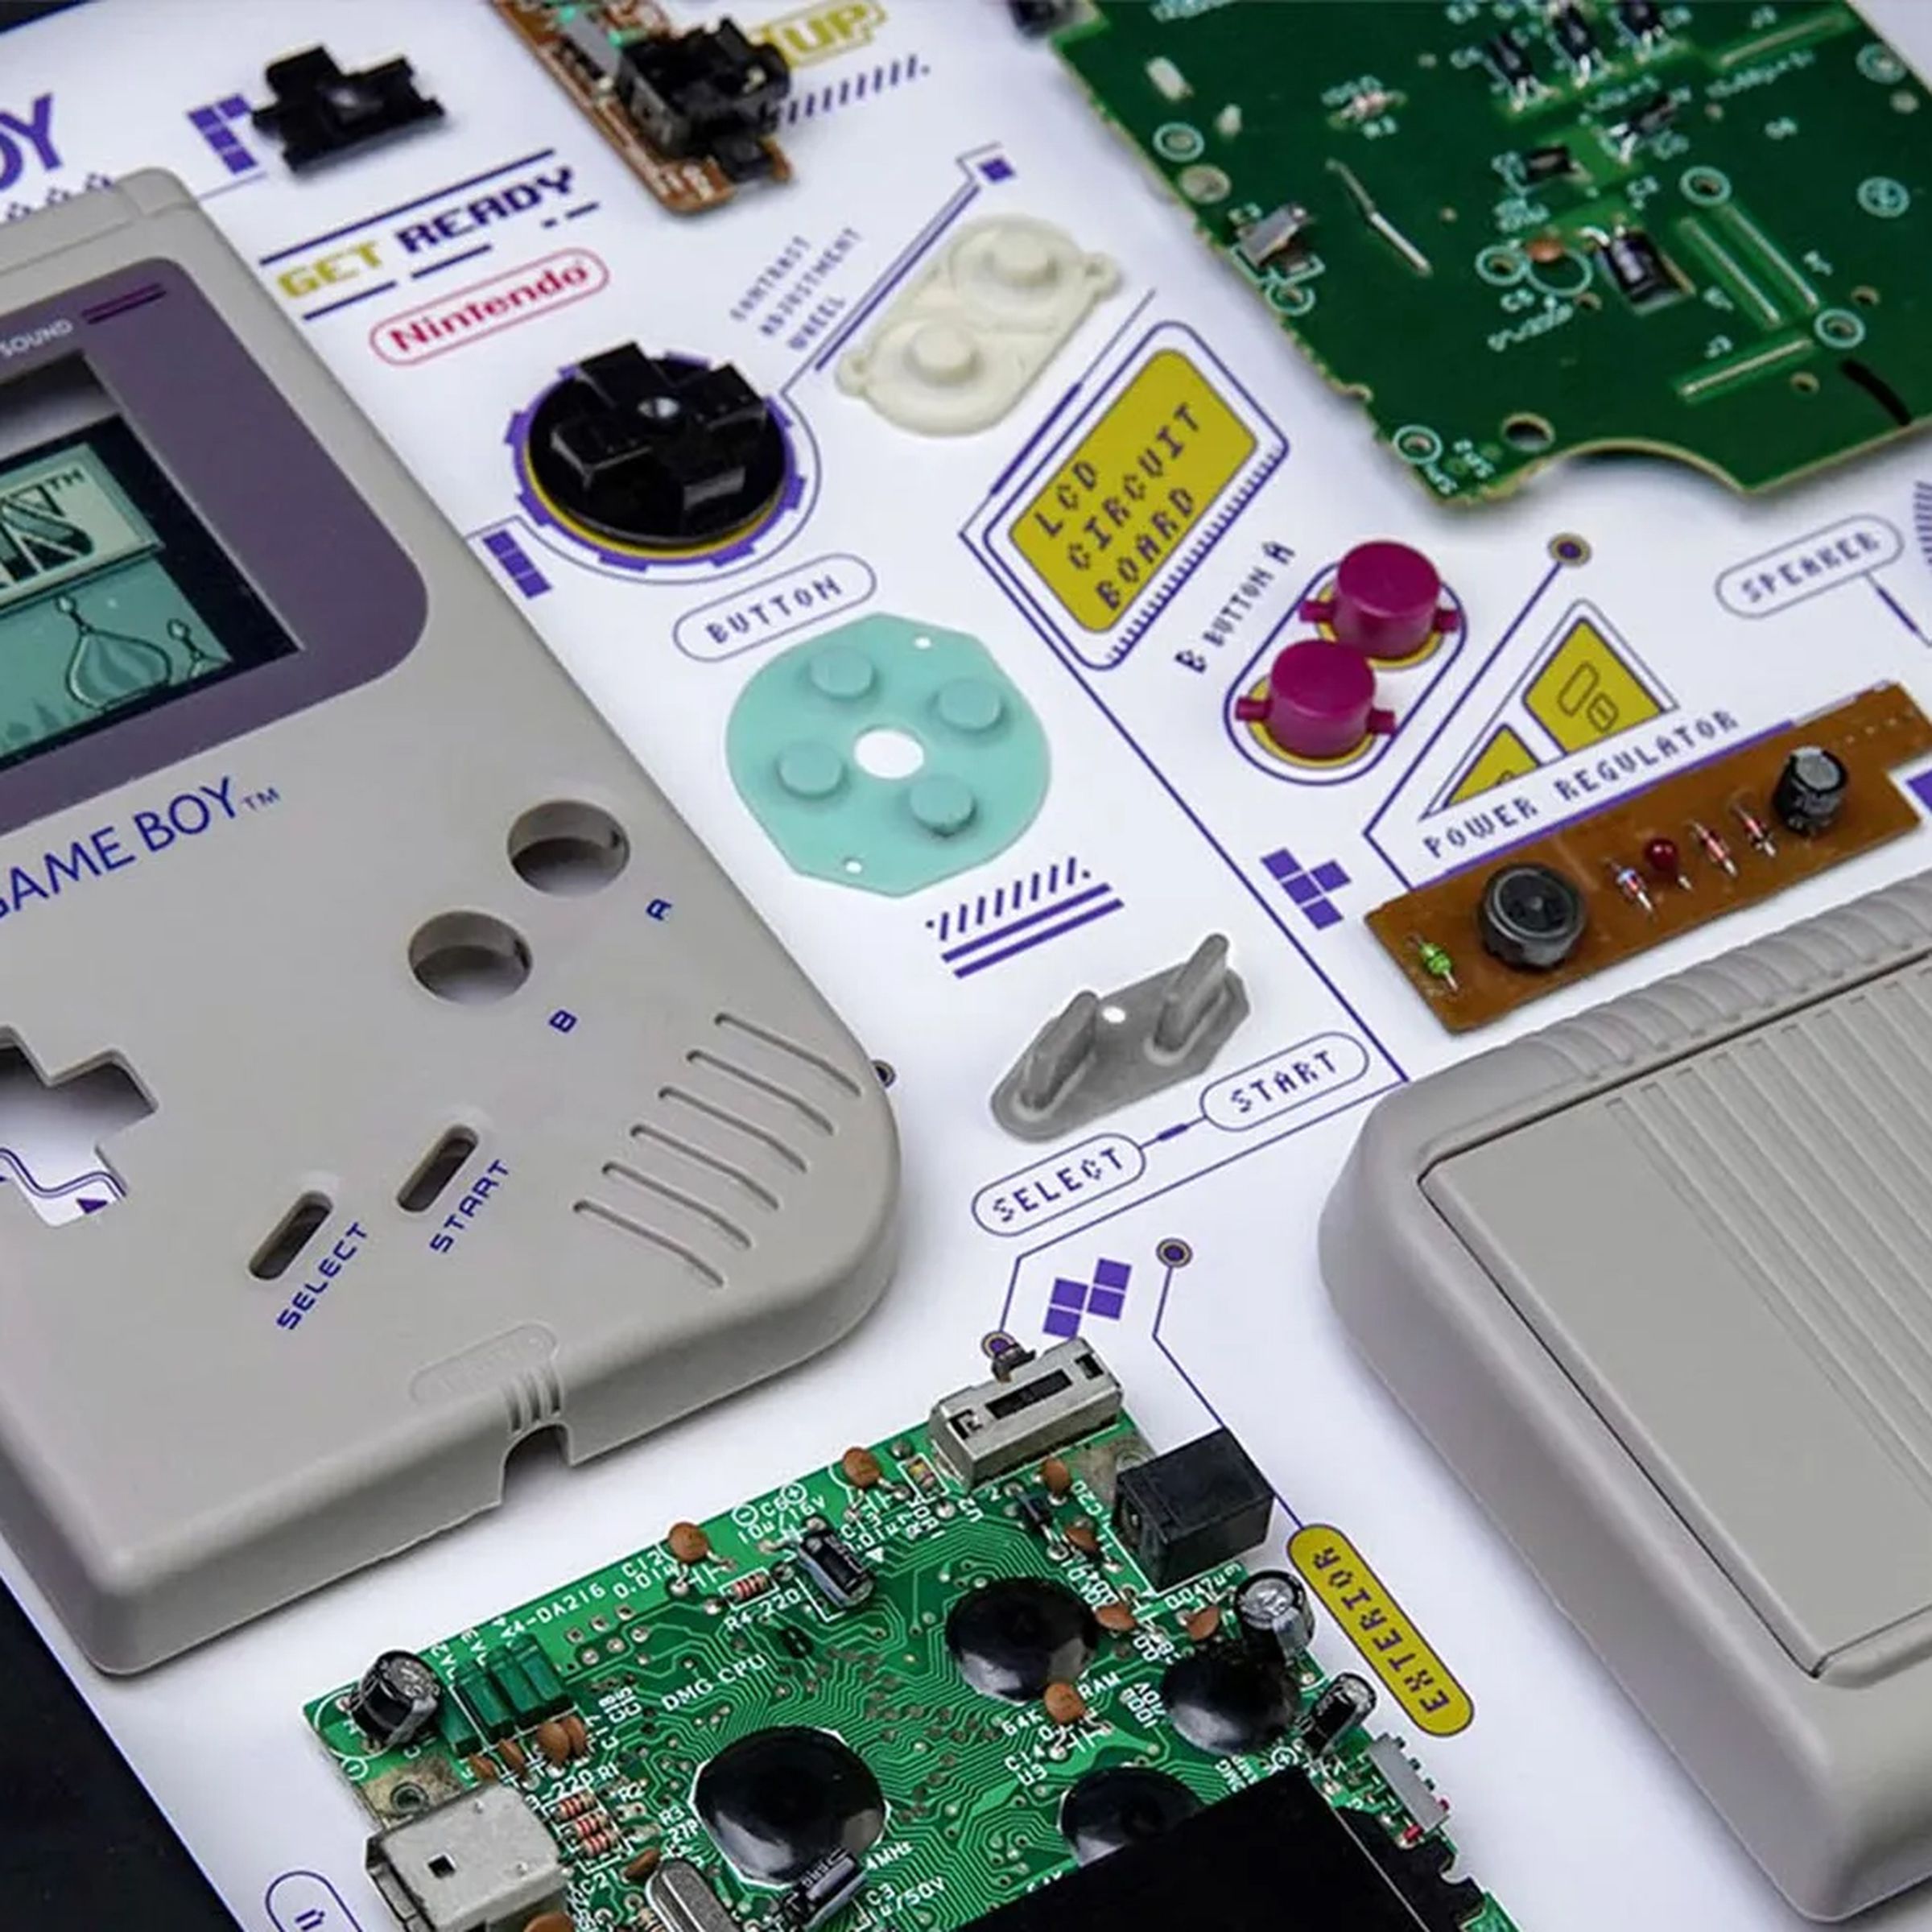 A close-up image of Grid’s framed, dissected Game Boy with labeled components and measurements.